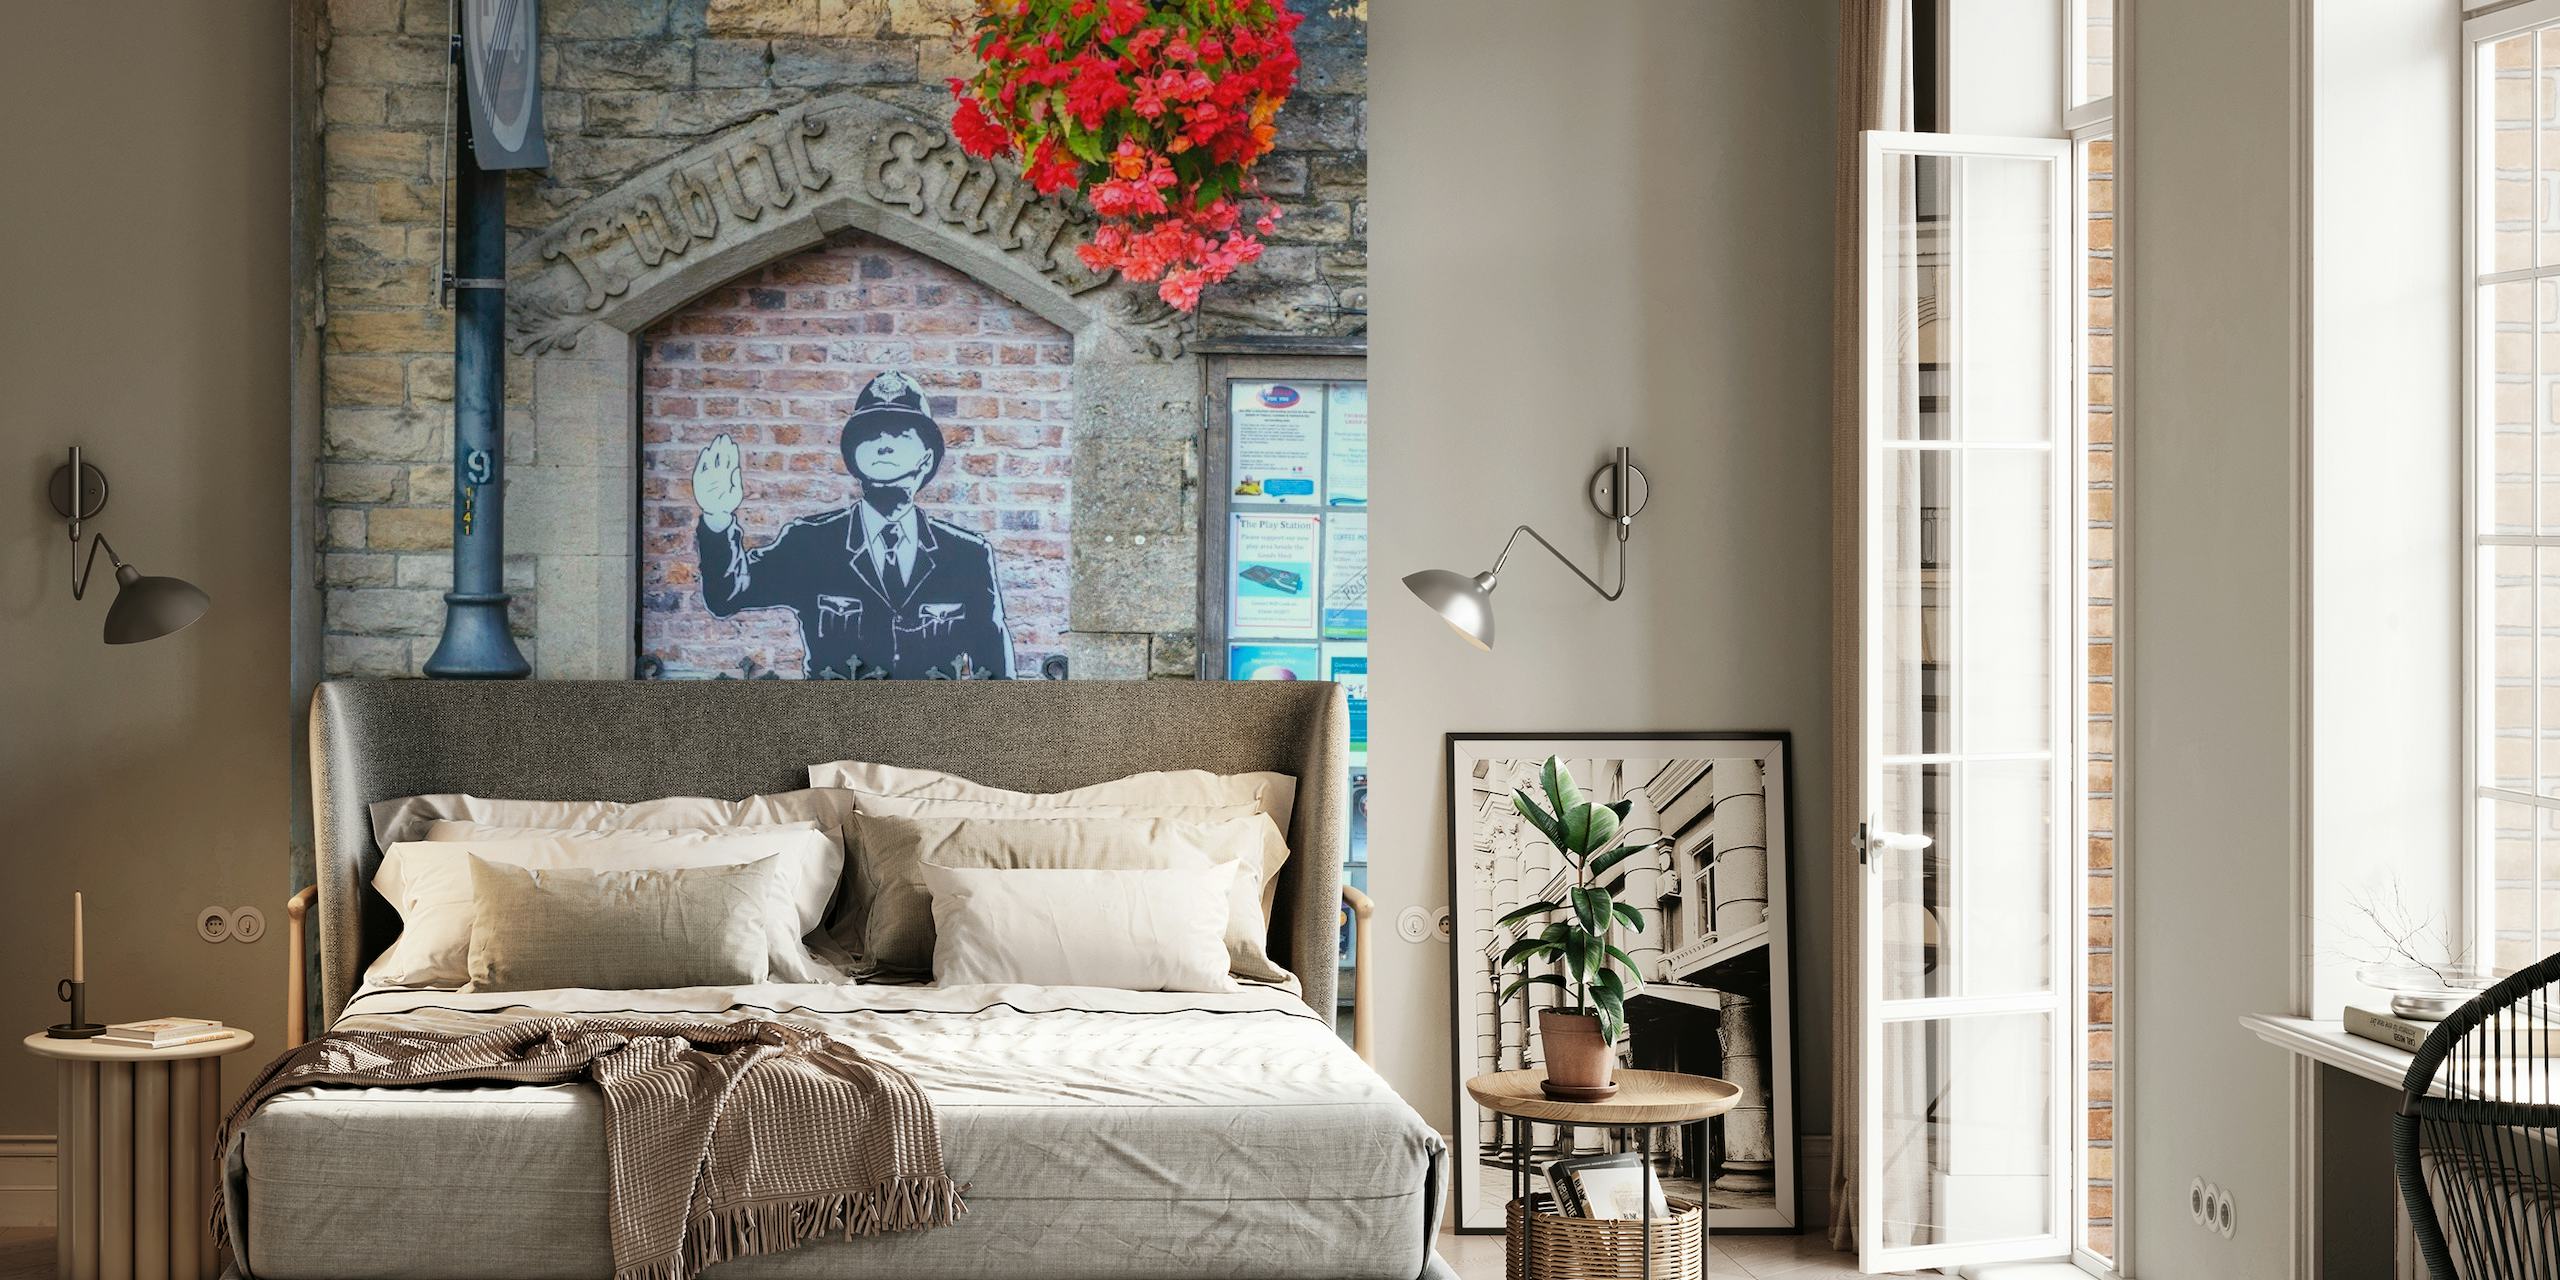 Cotswold village wall mural with a faux guard figure and floral accents